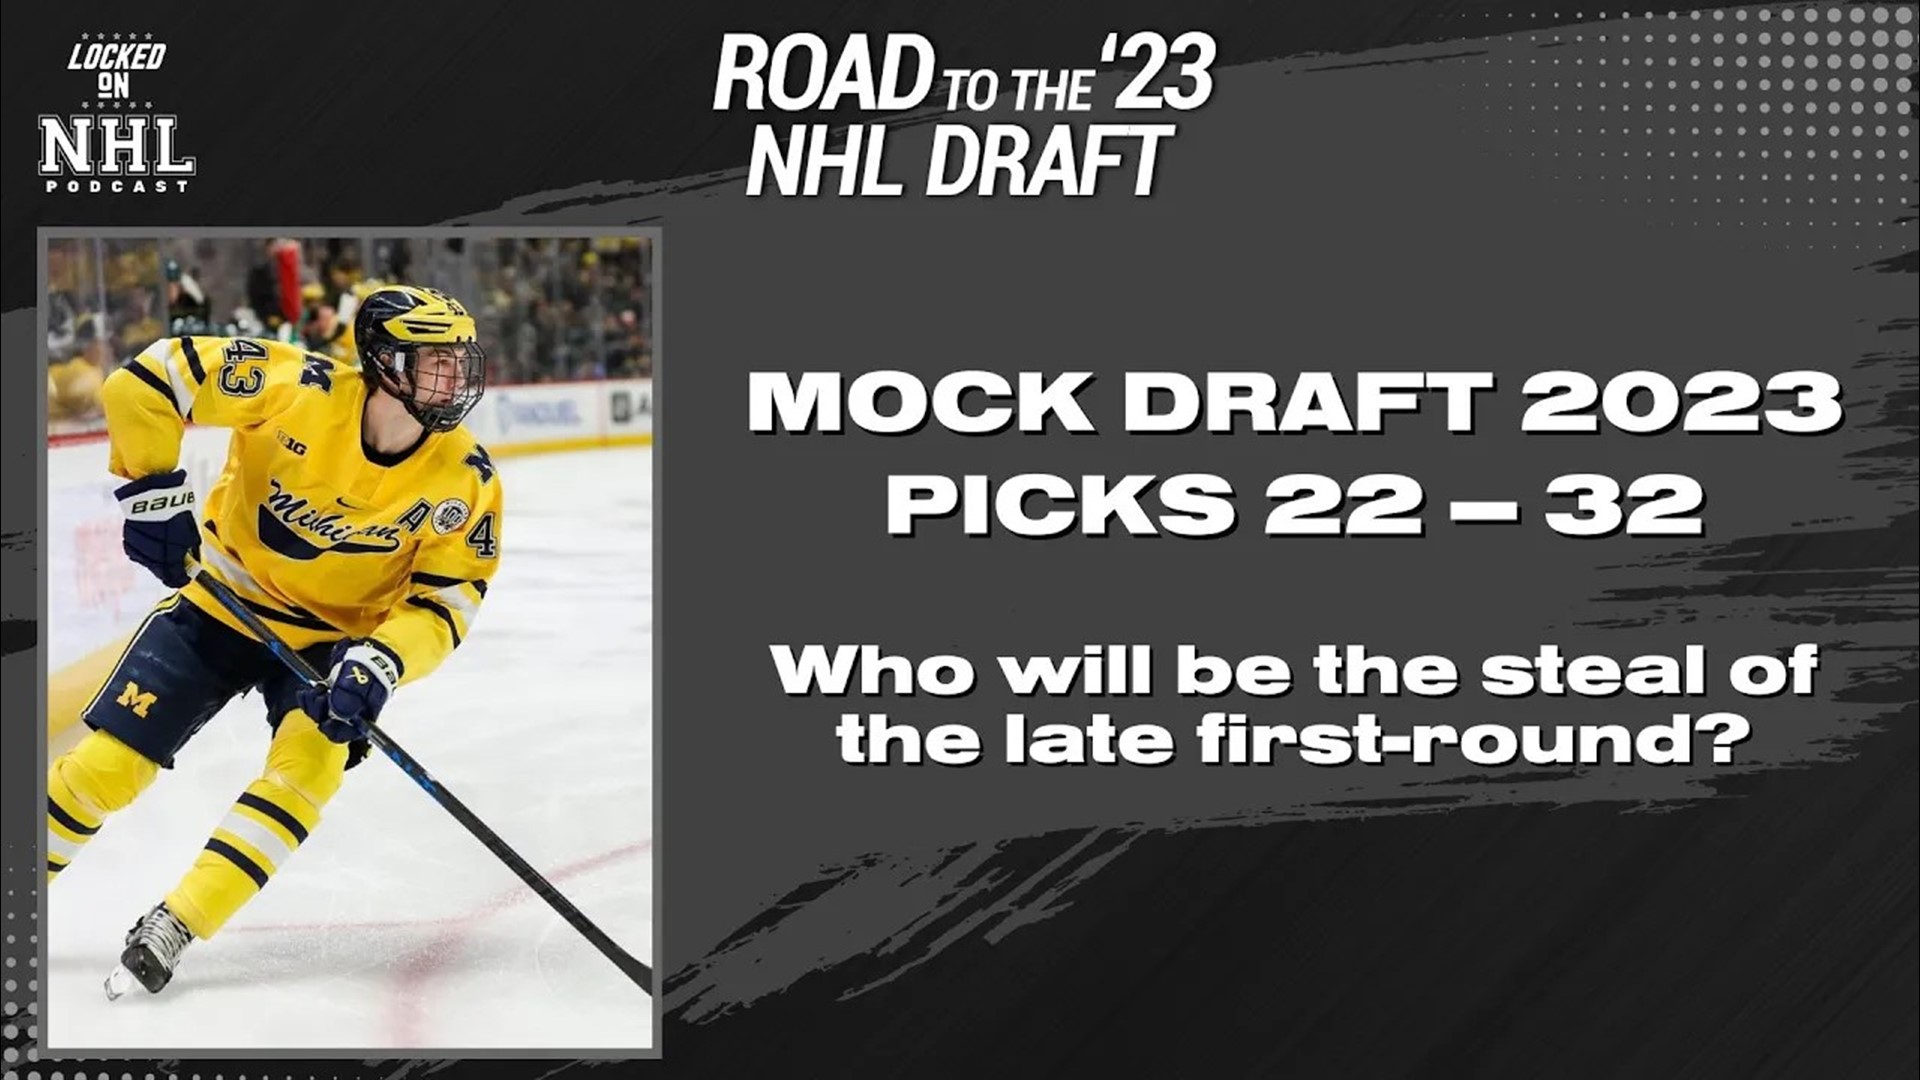 Will there be any steals late in the 1st round of 2023 NHL Draft?